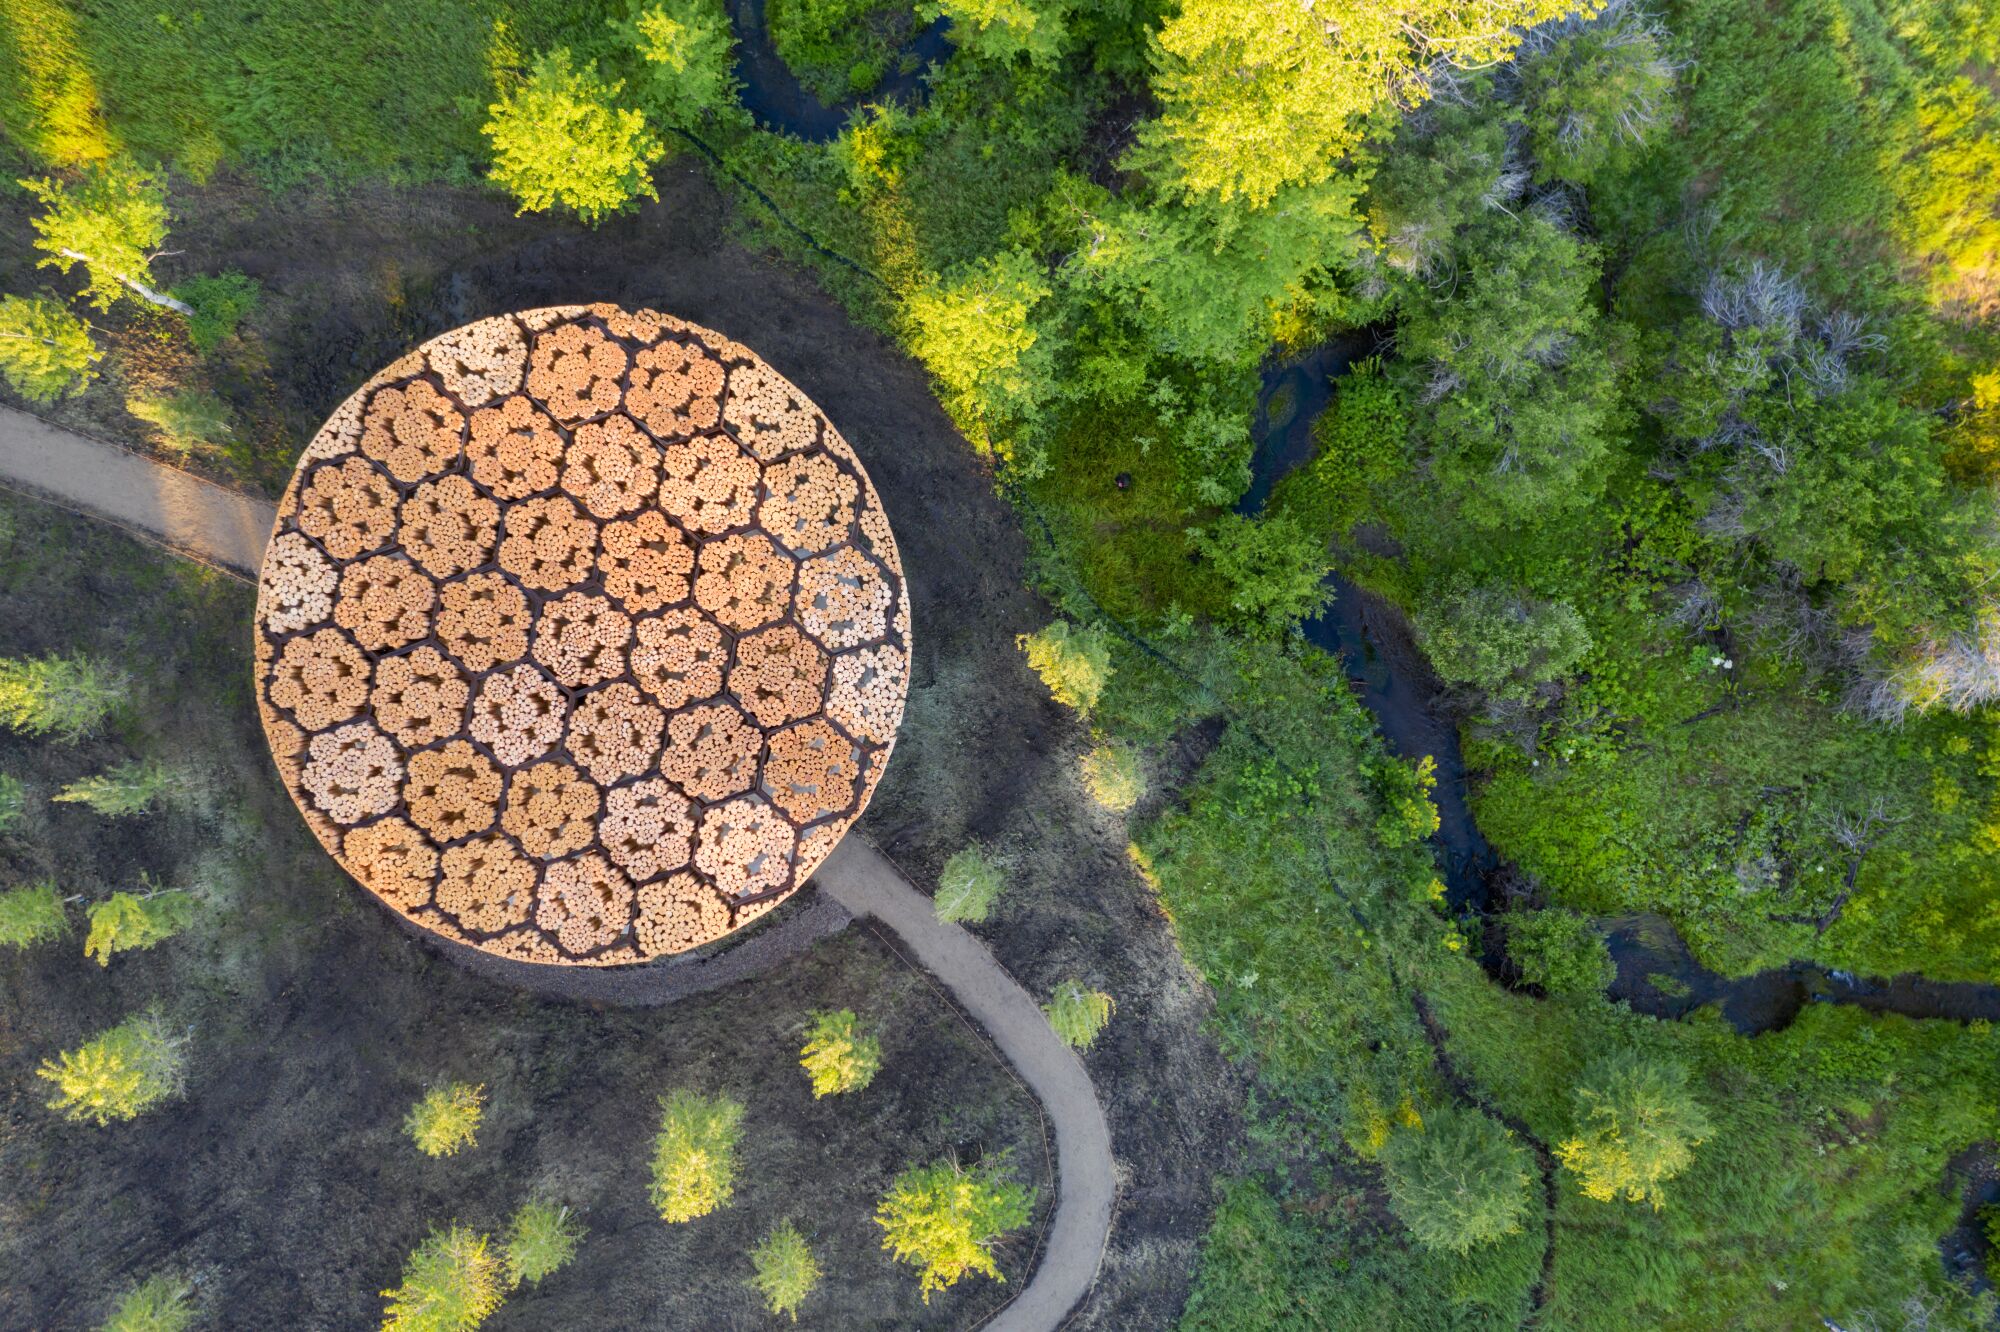 An overhead view shows a circular wood roof containing a geometric pattern of circles within it.